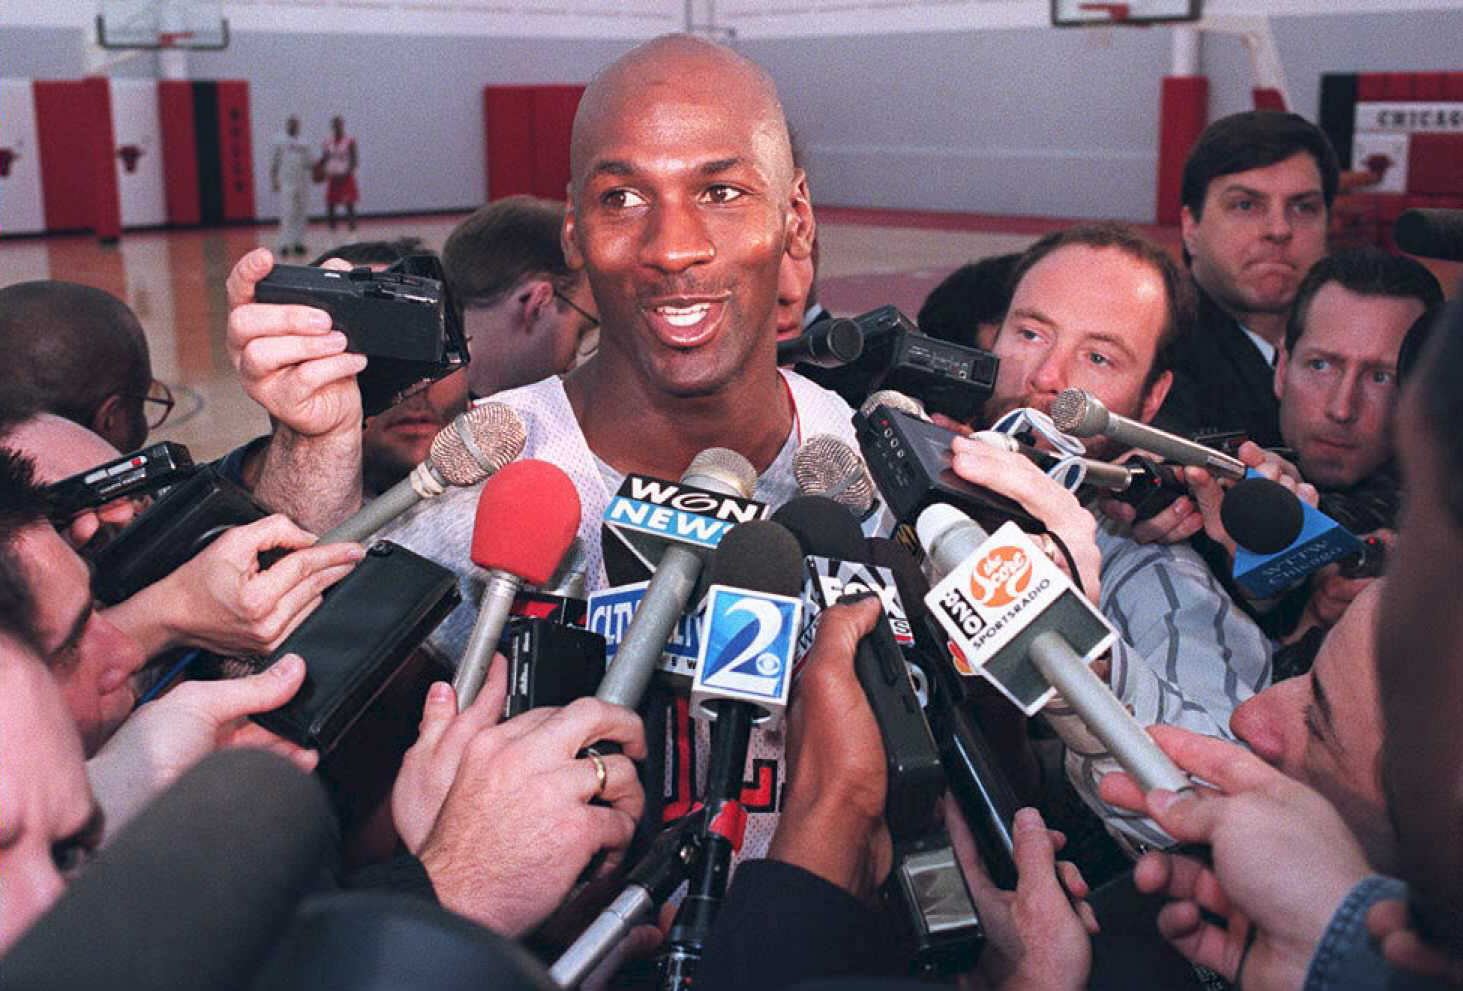 32 Years Today, Michael Jordan Signed His First NBA Contract. And Was Launched... | Net Worth